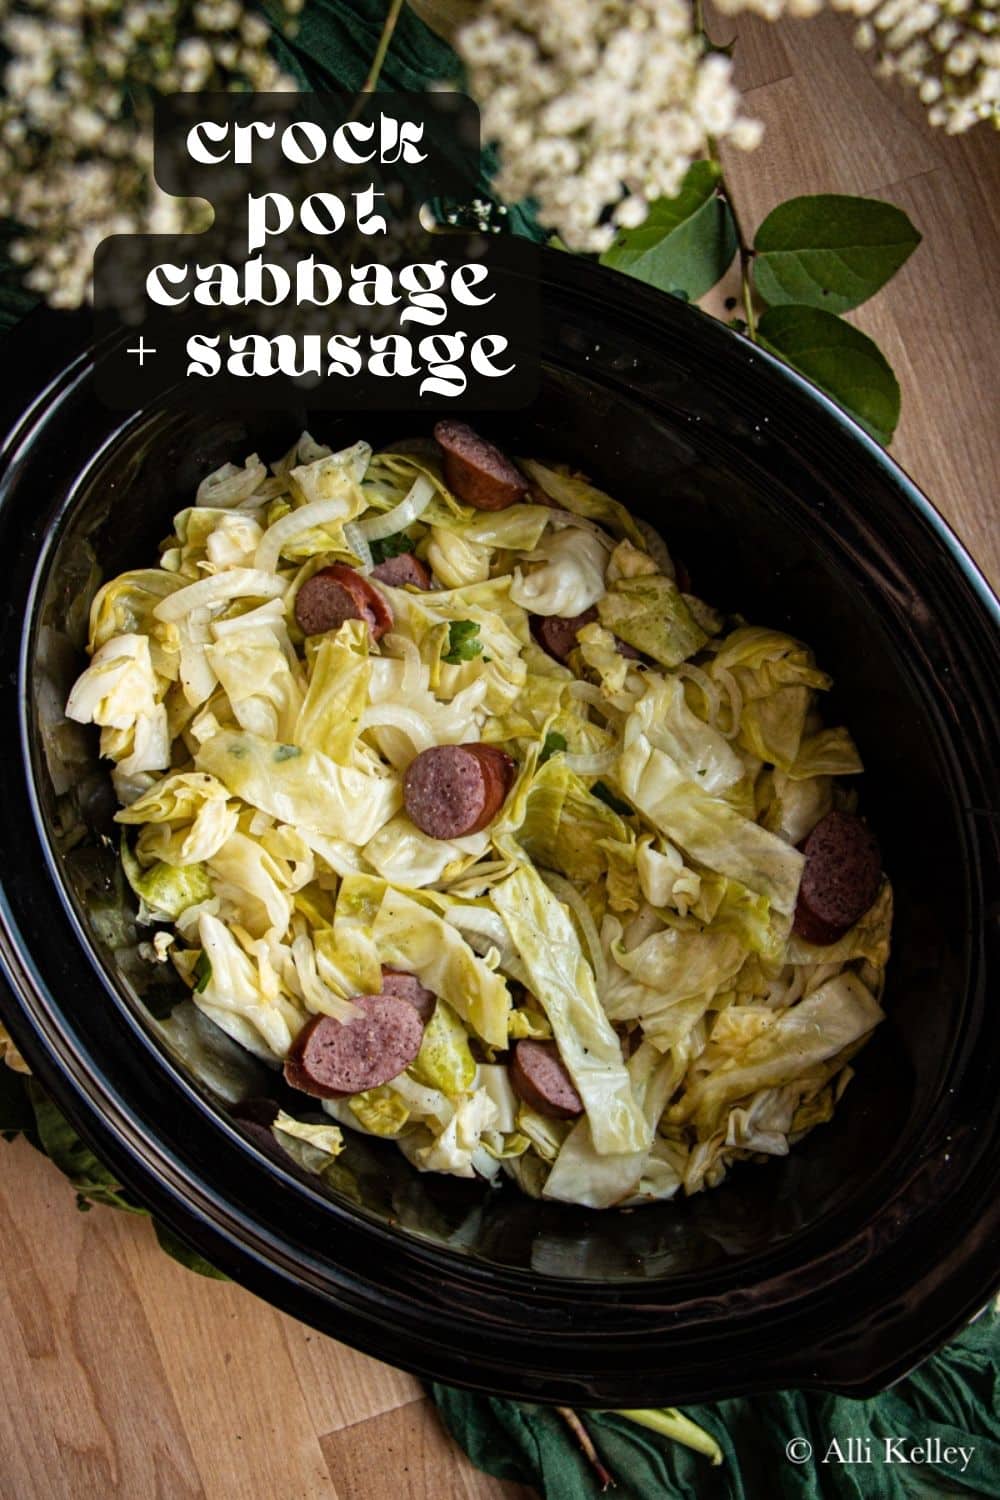 Crockpot cabbage and sausage is a budget-friendly dish that's packed with tons of flavor! It's an ideal addition to any weeknight dinner and requires minimal effort to prepare. With just a few simple ingredients, you can easily whip up this delicious meal in your slow cooker - comfort food at its best!